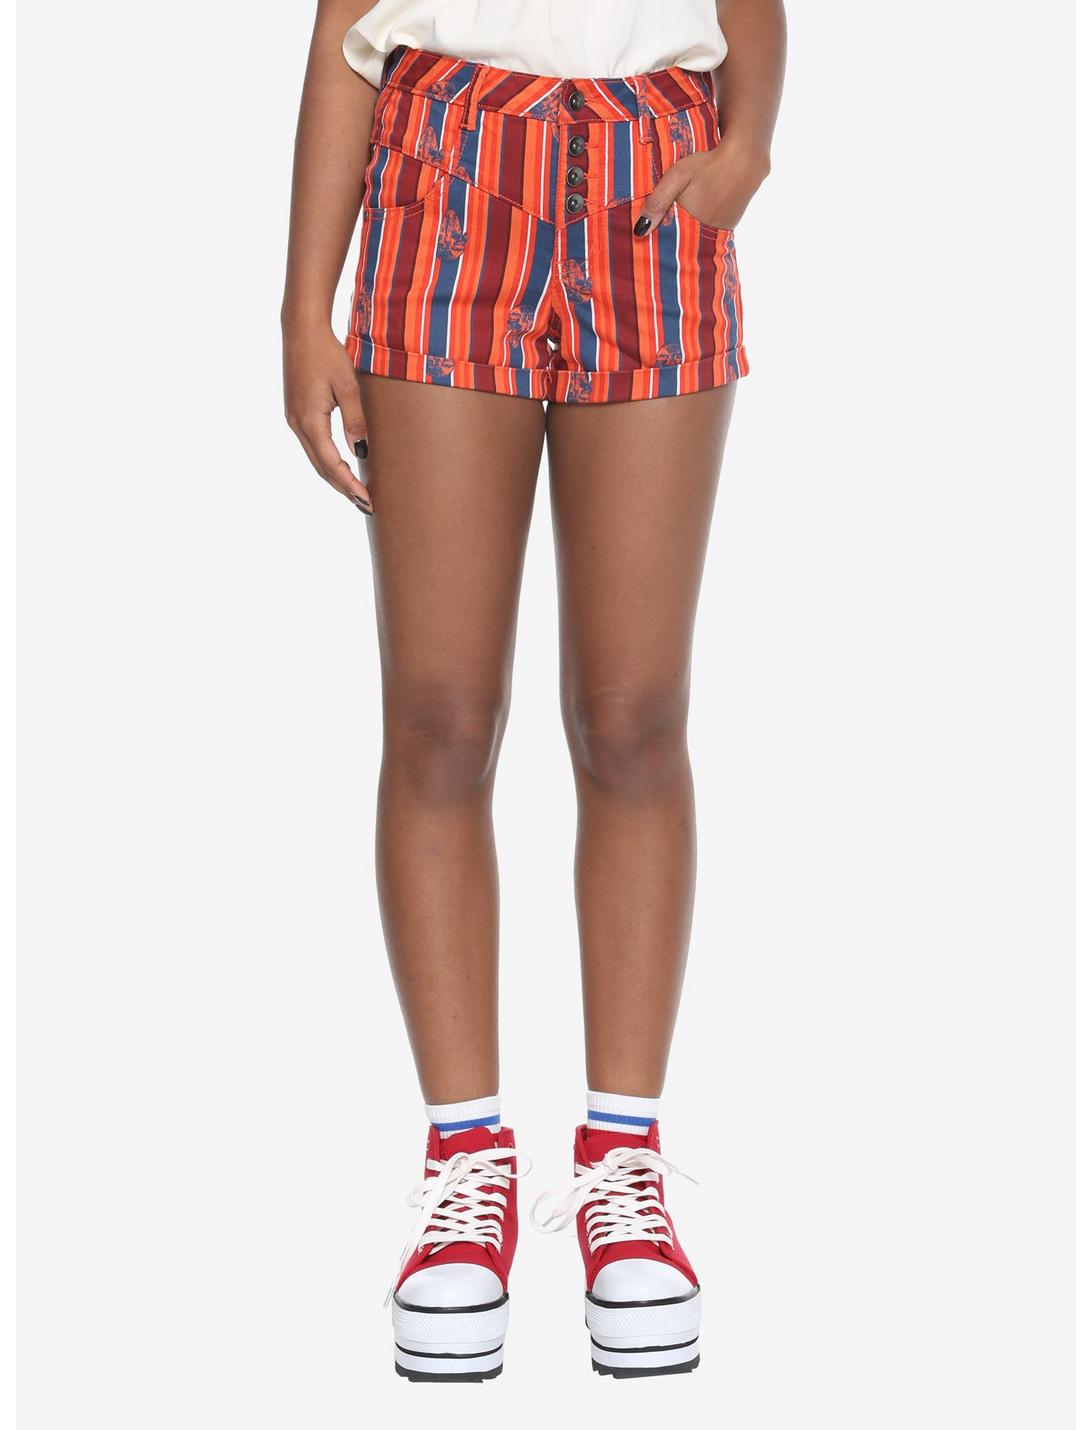 Her Universe Star Wars Solo Striped High-Waisted Shorts, MULTI, hi-res